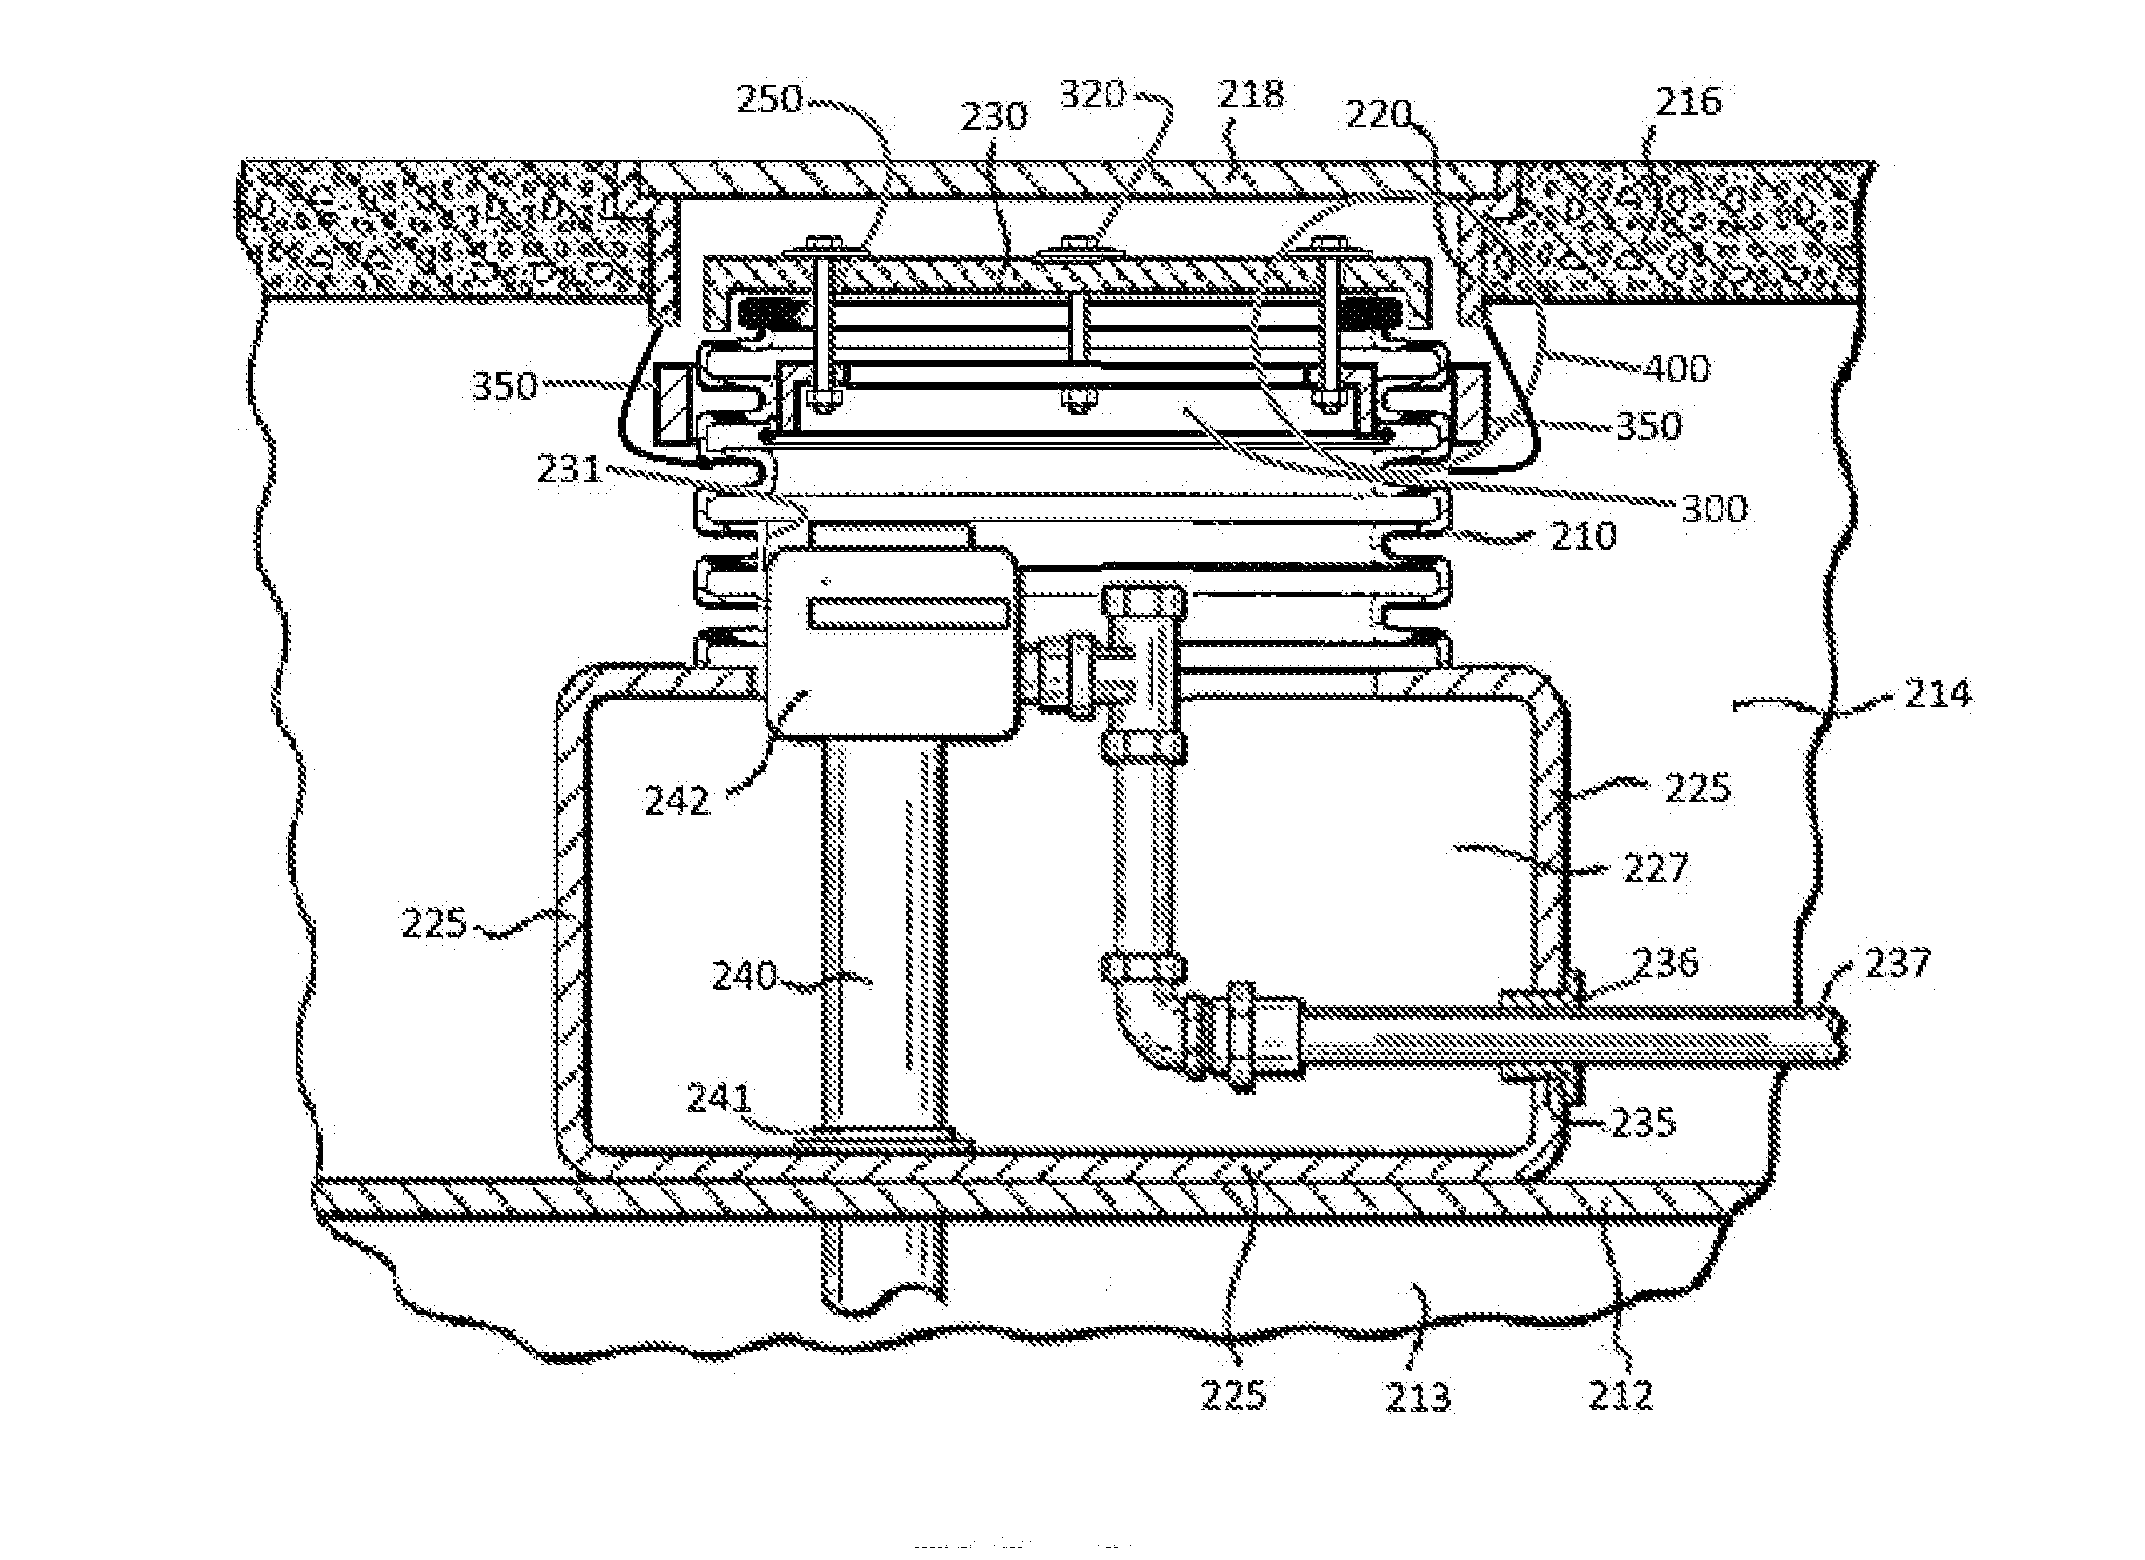 System and method for sealing sump covers